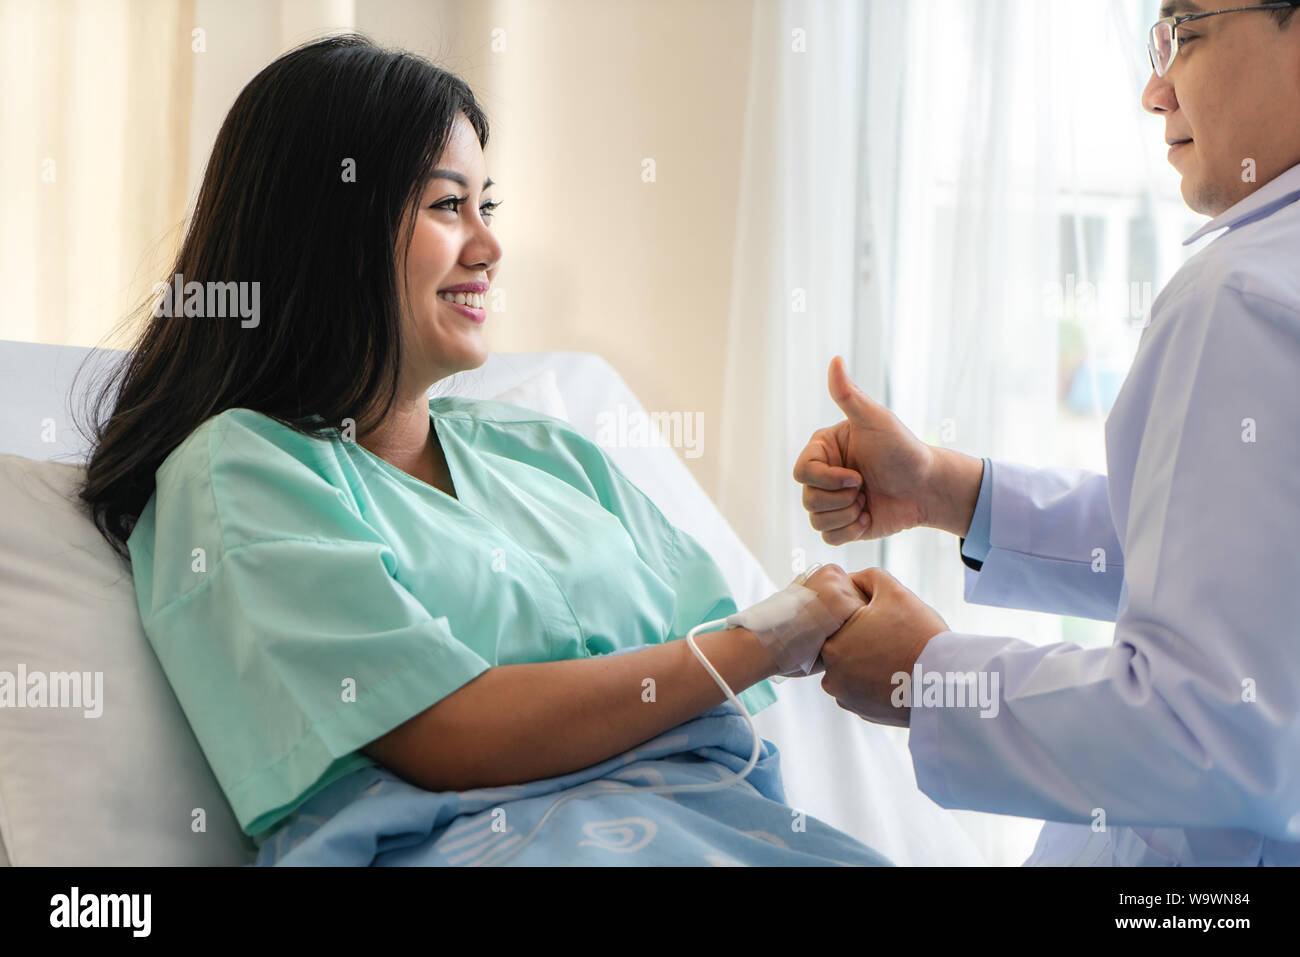 Hand of man doctor reassuring his female patient with thump up in bed at hospital. Medical ethics and trust concept. Stock Photo